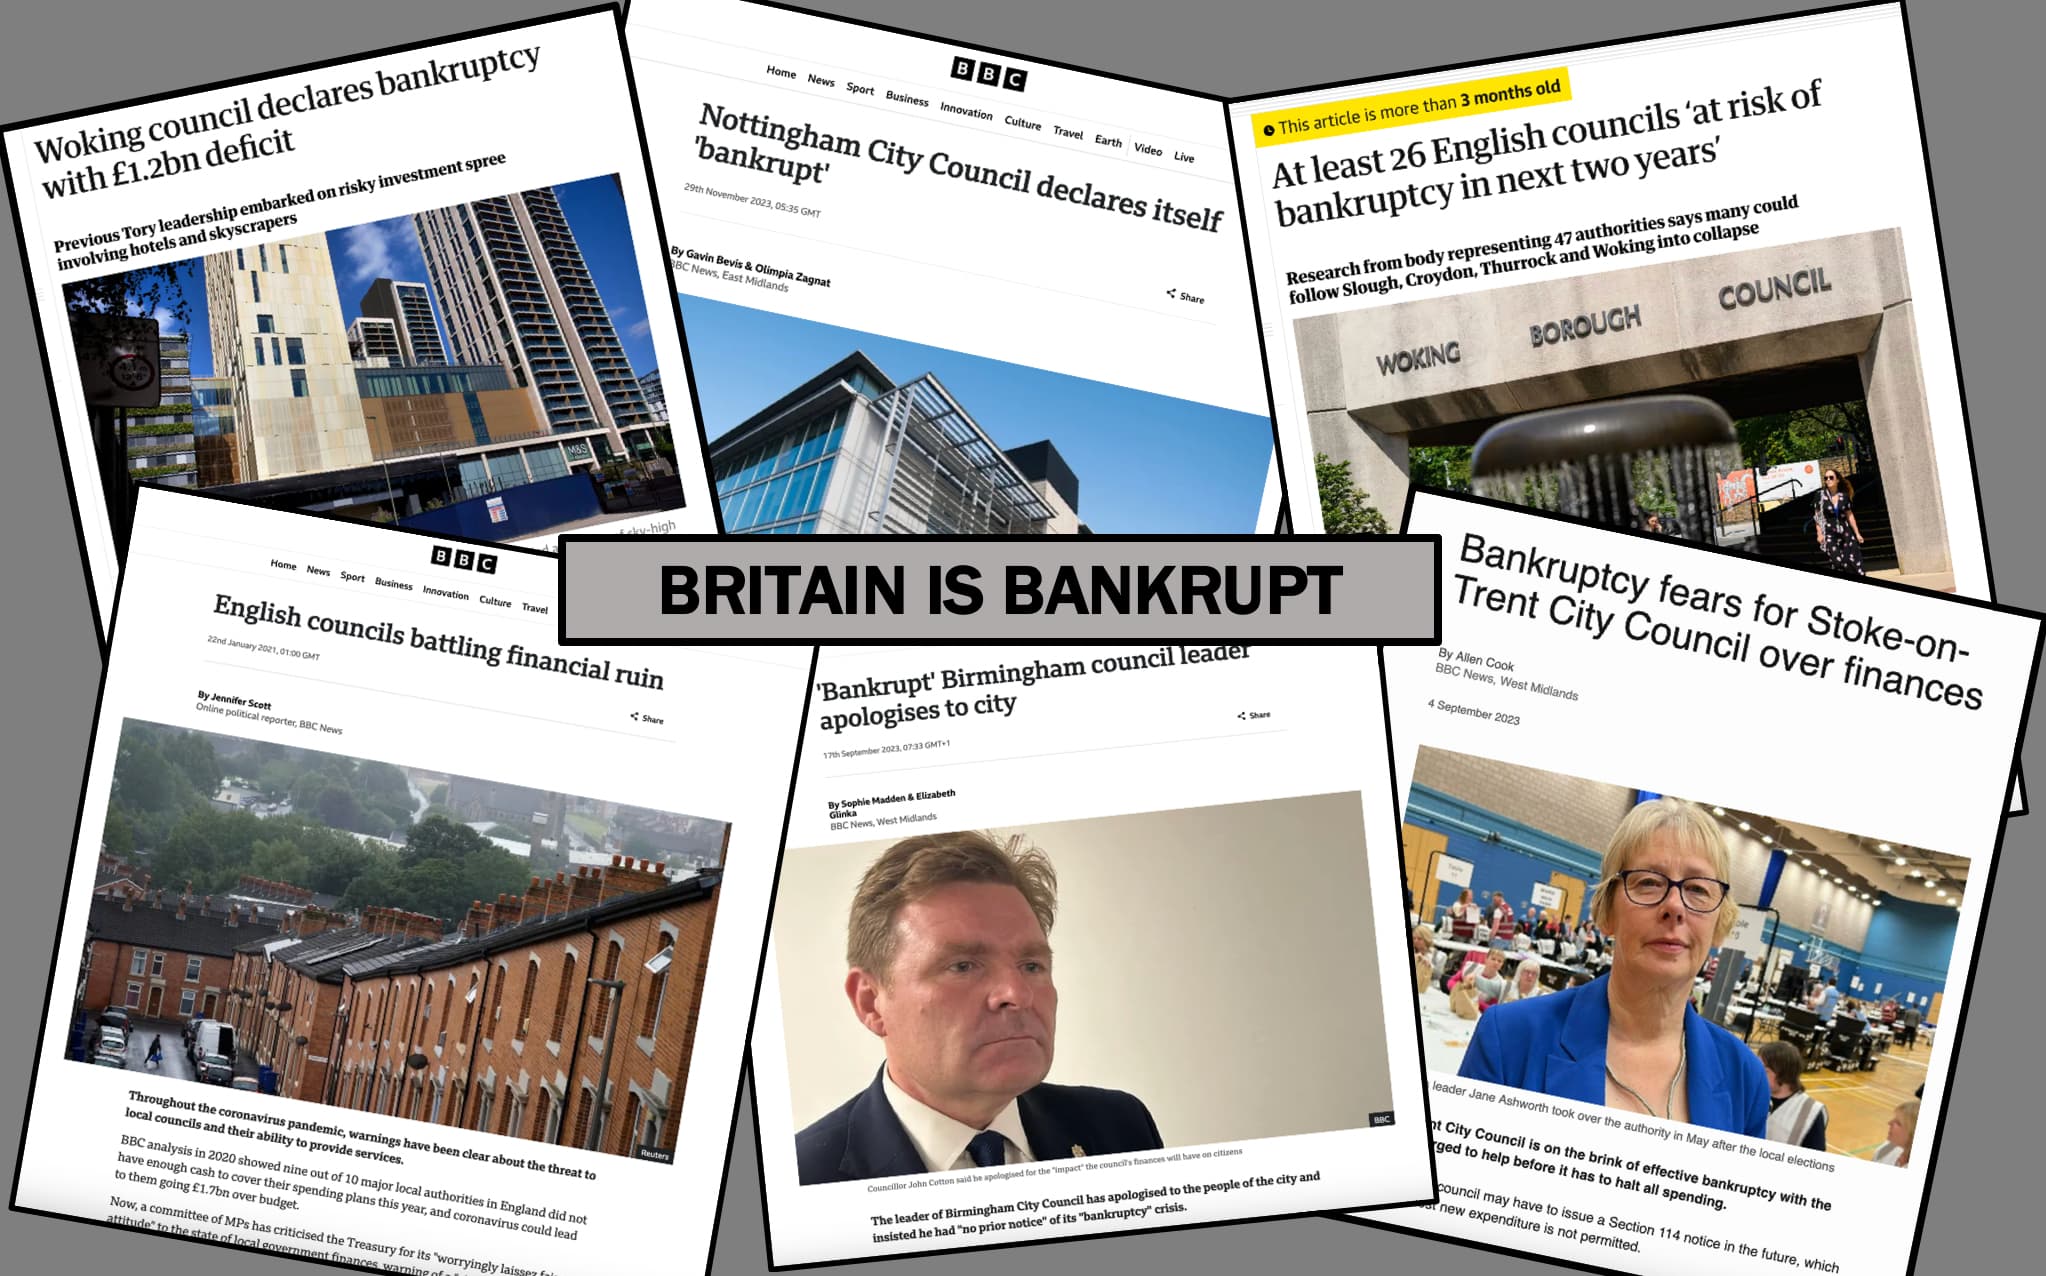 AN IMAGE WITH HEADLINES OF MANY COUNCILS IN BRITAIN DECLARING BANKRUPTCY